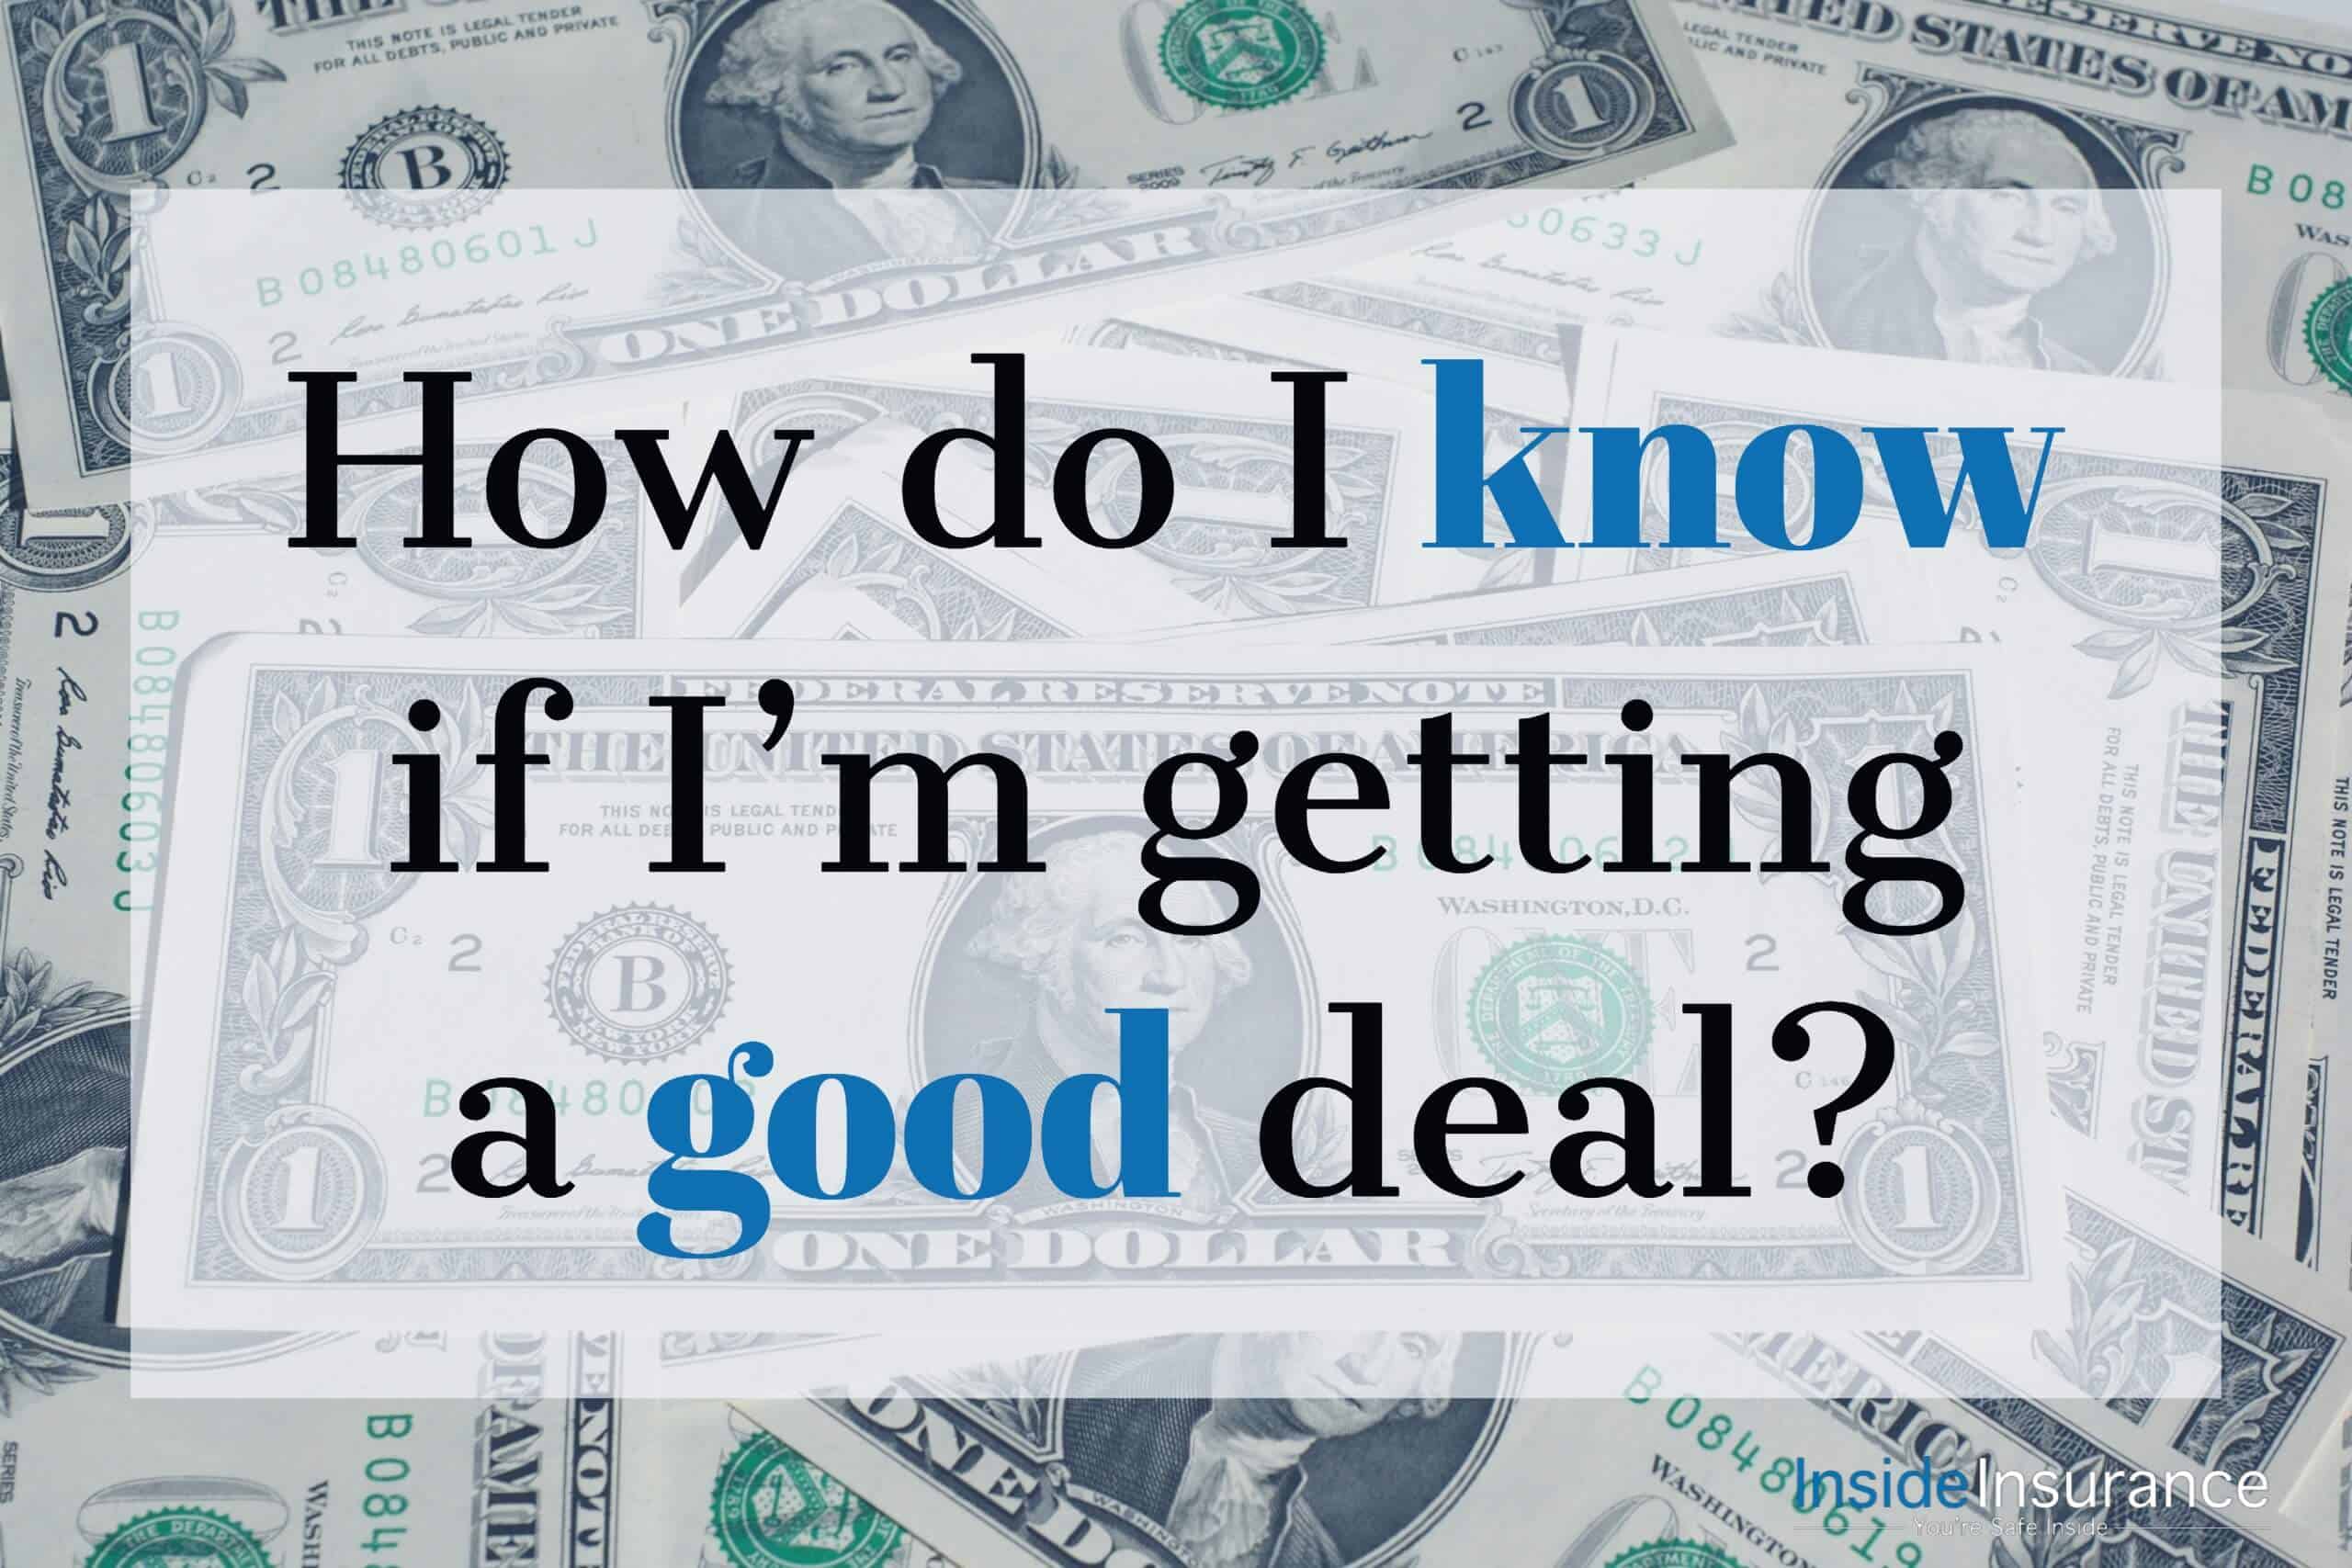 How do I know if I’m getting a good deal?